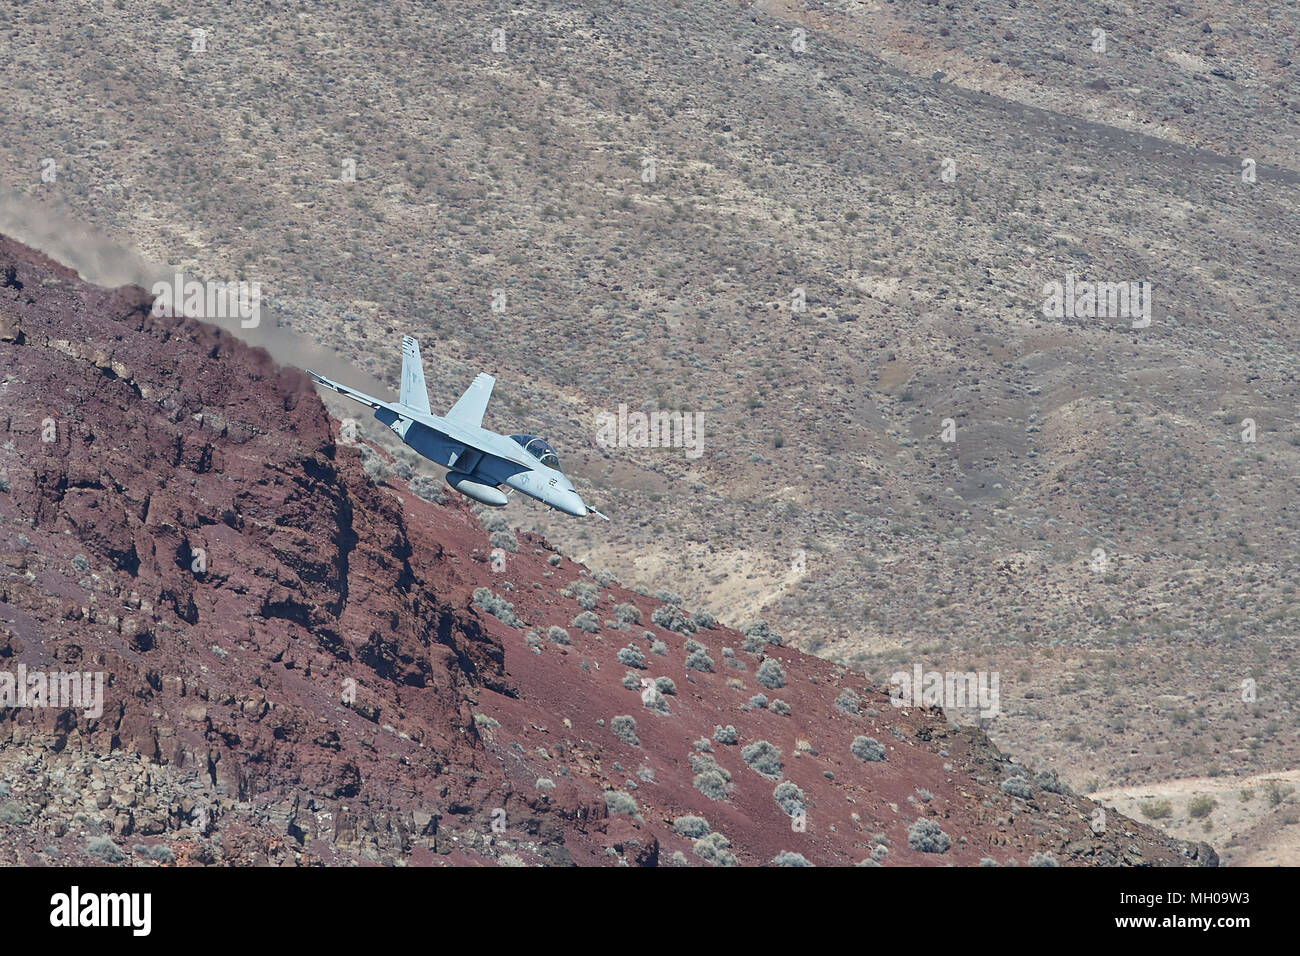 US Navy F/A-18F Super Hornet Jet Fighter Flying At Low Level Through Rainbow Canyon California, USA. Stock Photo